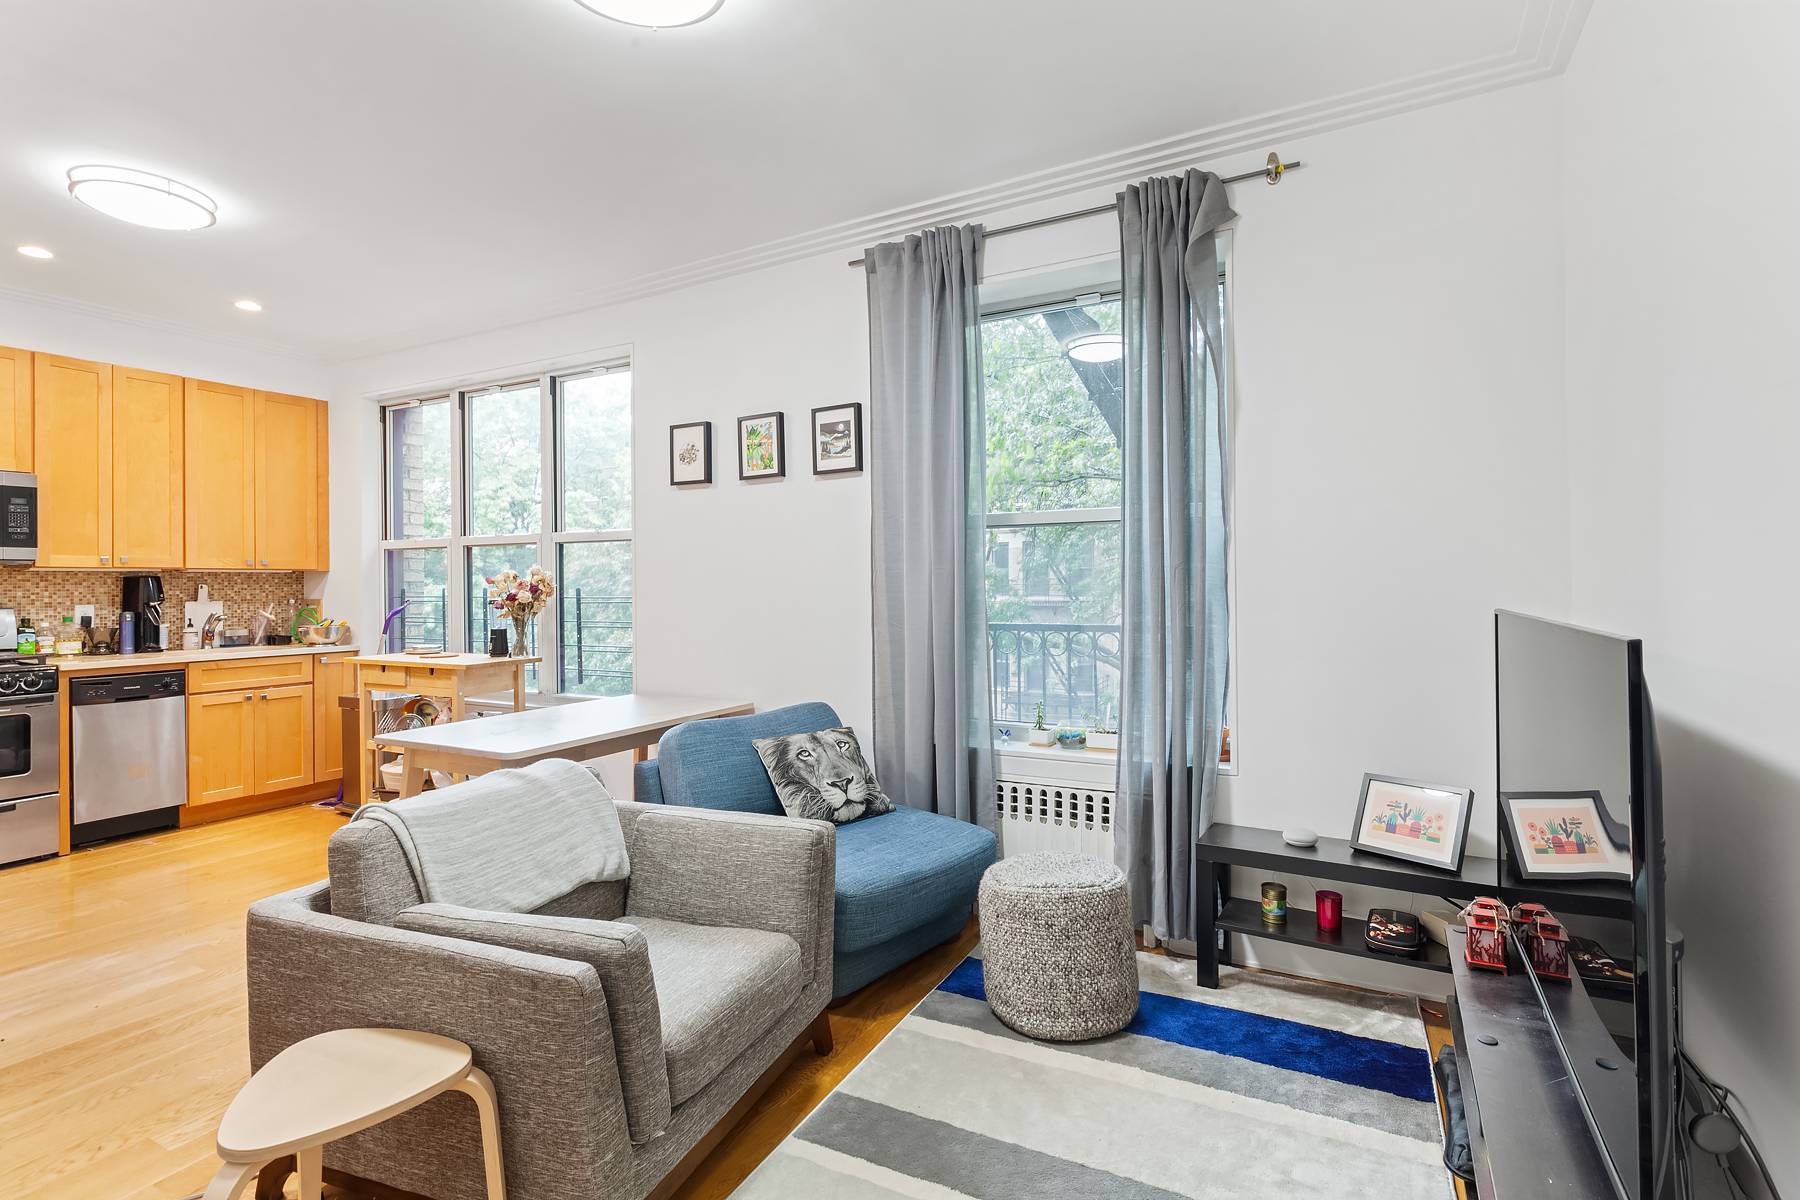 Luxuriously Renovated 2 Bedroom One Block from Prospect Park This gorgeous 2BR 1BA will allure you with its luxury renovations, excellent layout and bright natural light.